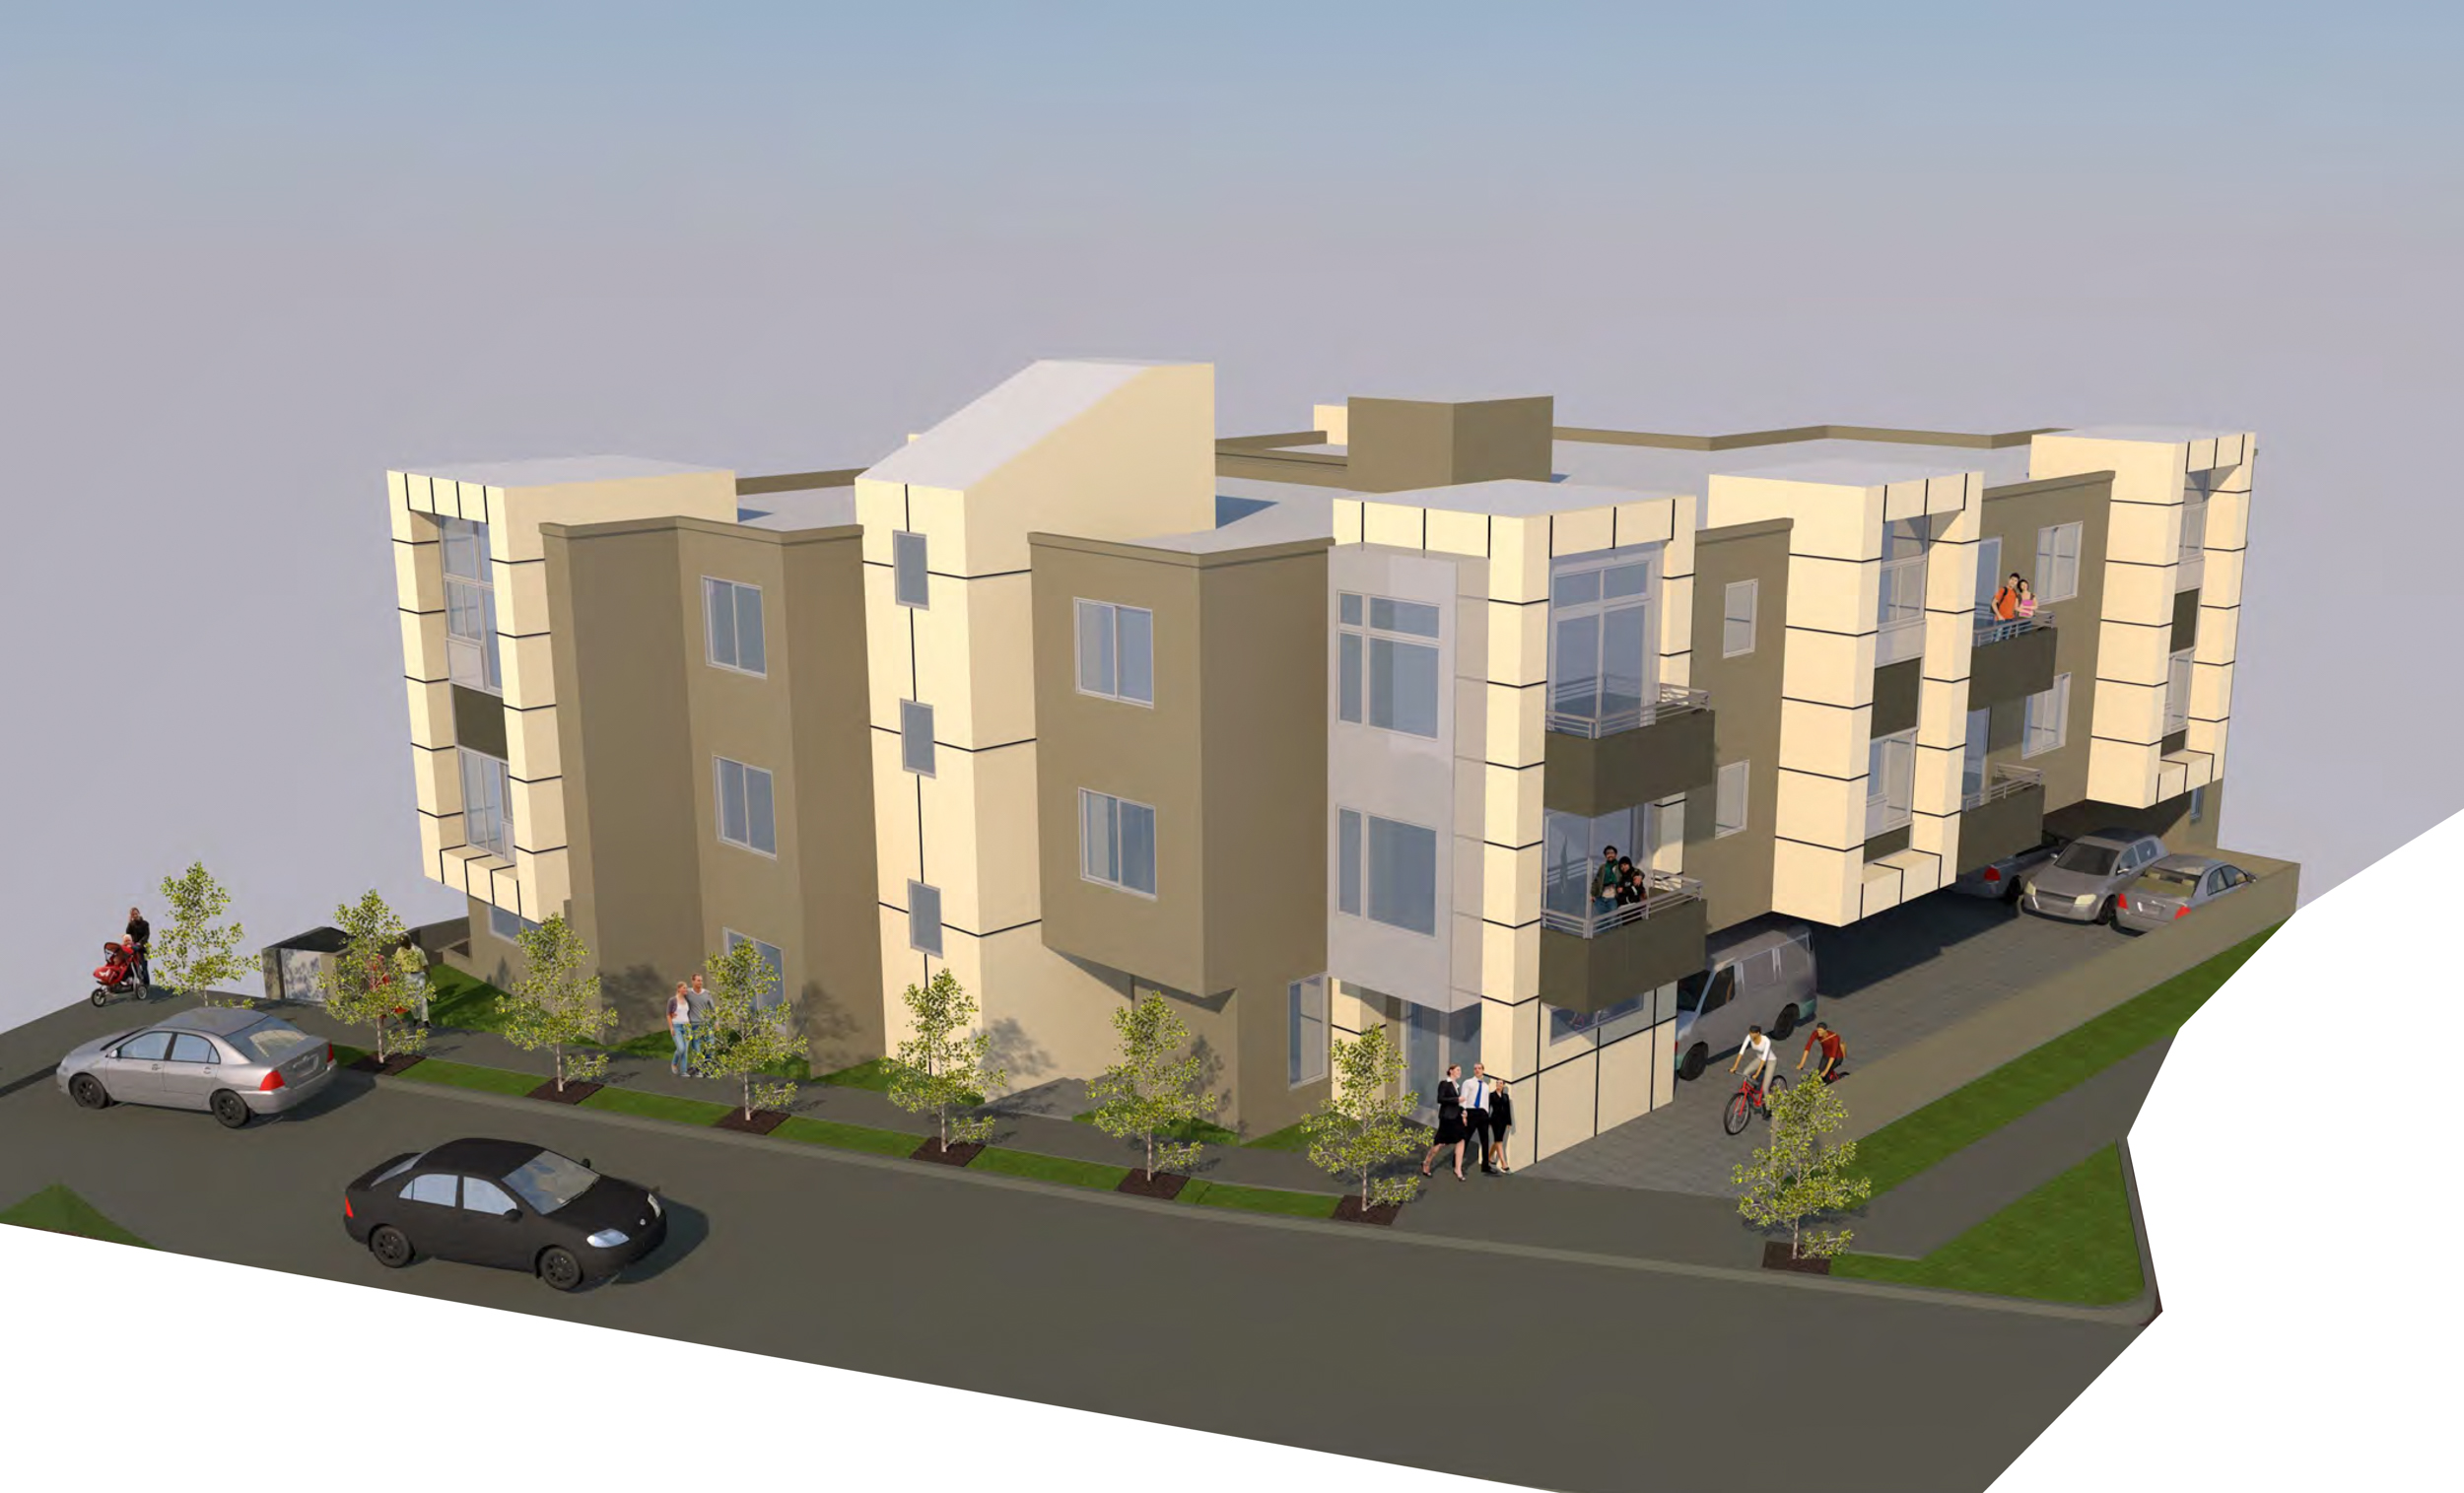 1700 Egbert Avenue affordable housing aerial view, rendering by Kotas and Pantaleoni Architects